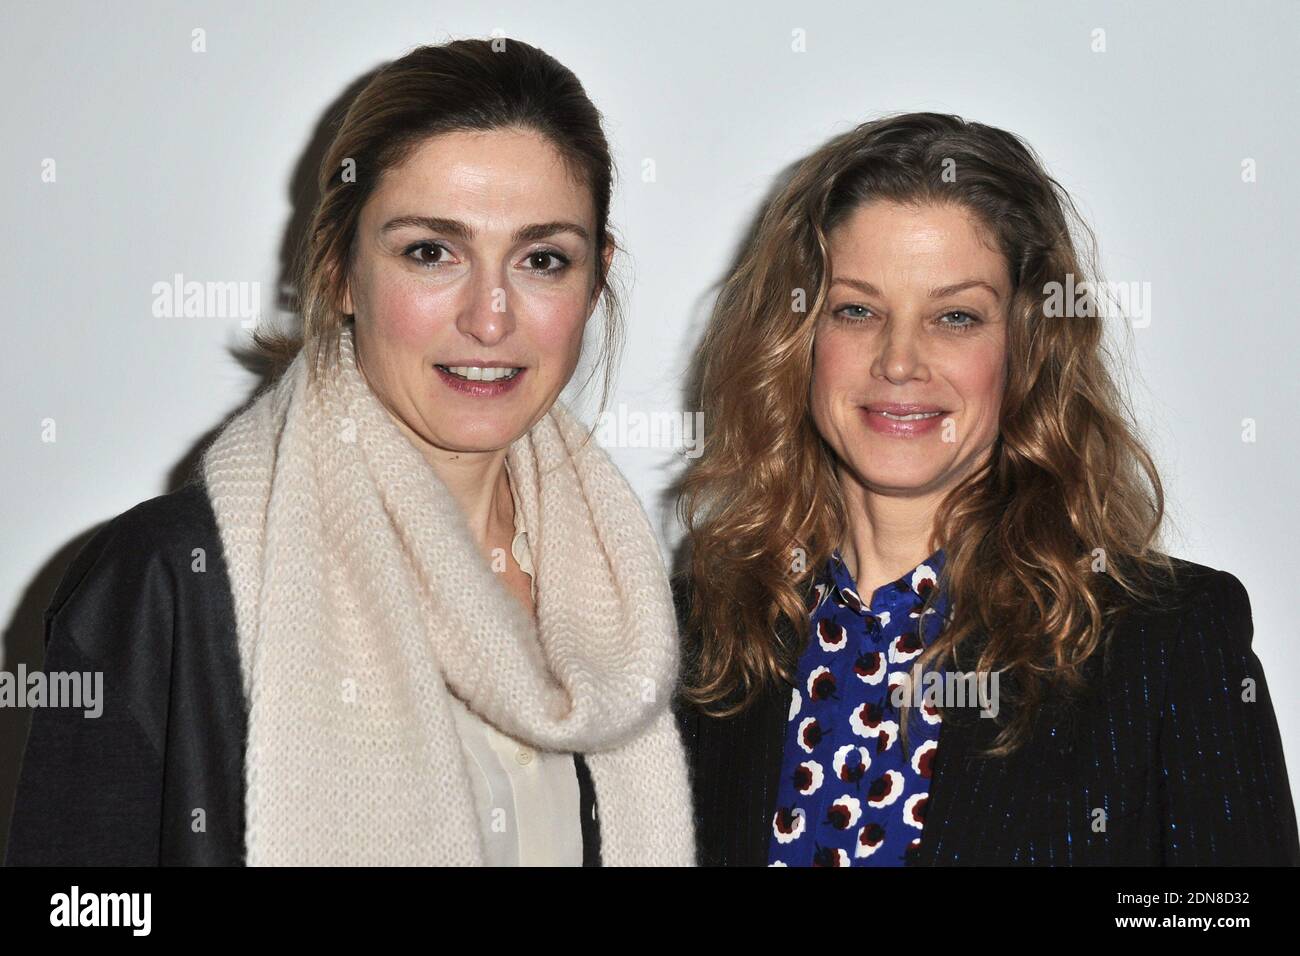 Exclusive - Julie Gayet and Marie Baumer attending the La Place Des Femmes Dans Le Cinema round table at the Museum fur Film und Fernsehen in Berlin, Germany on February 12, 2015. Photo by Aurore Marechal/ABACAPRESS.COM Stock Photo